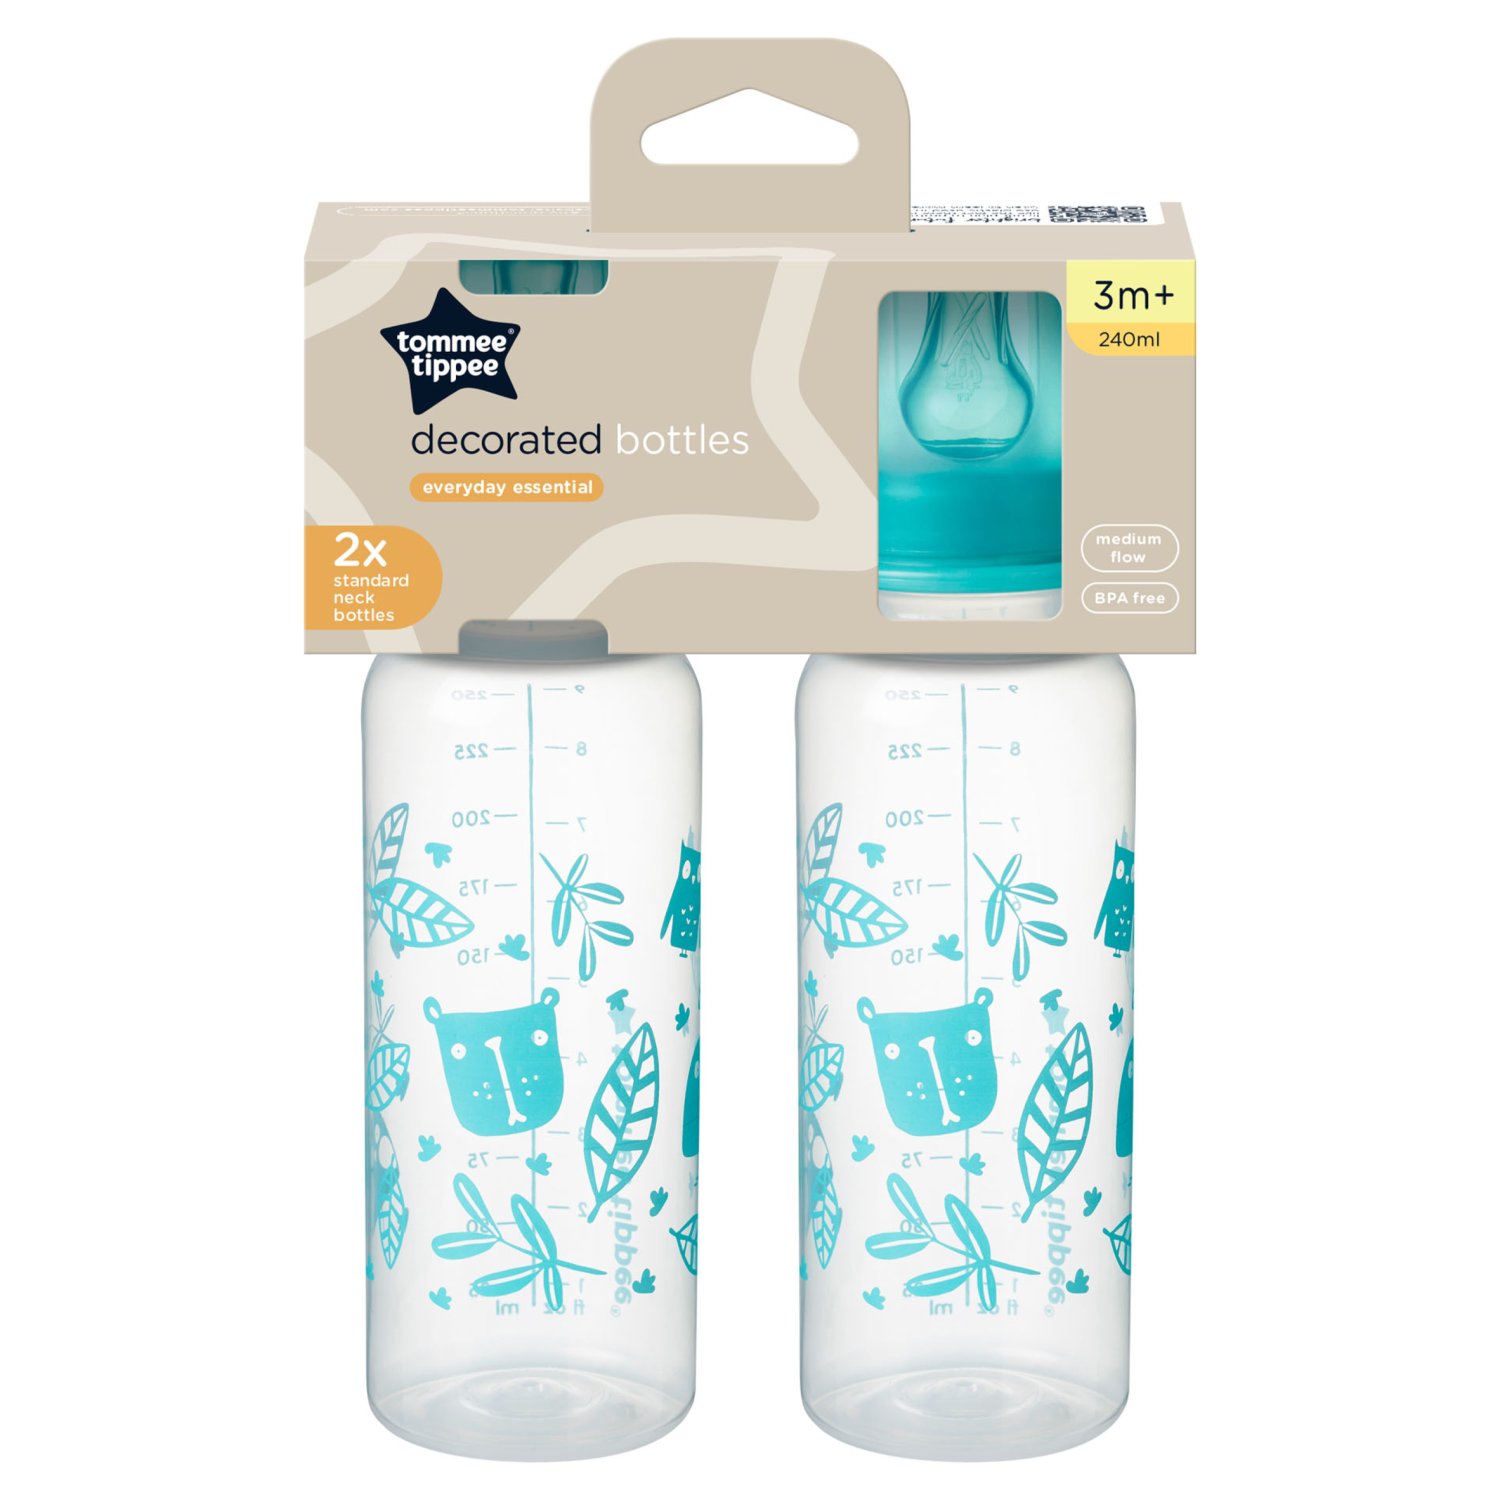 Tommee Tippee 2 Decorated Bottles 3+ Months (1 Piece)